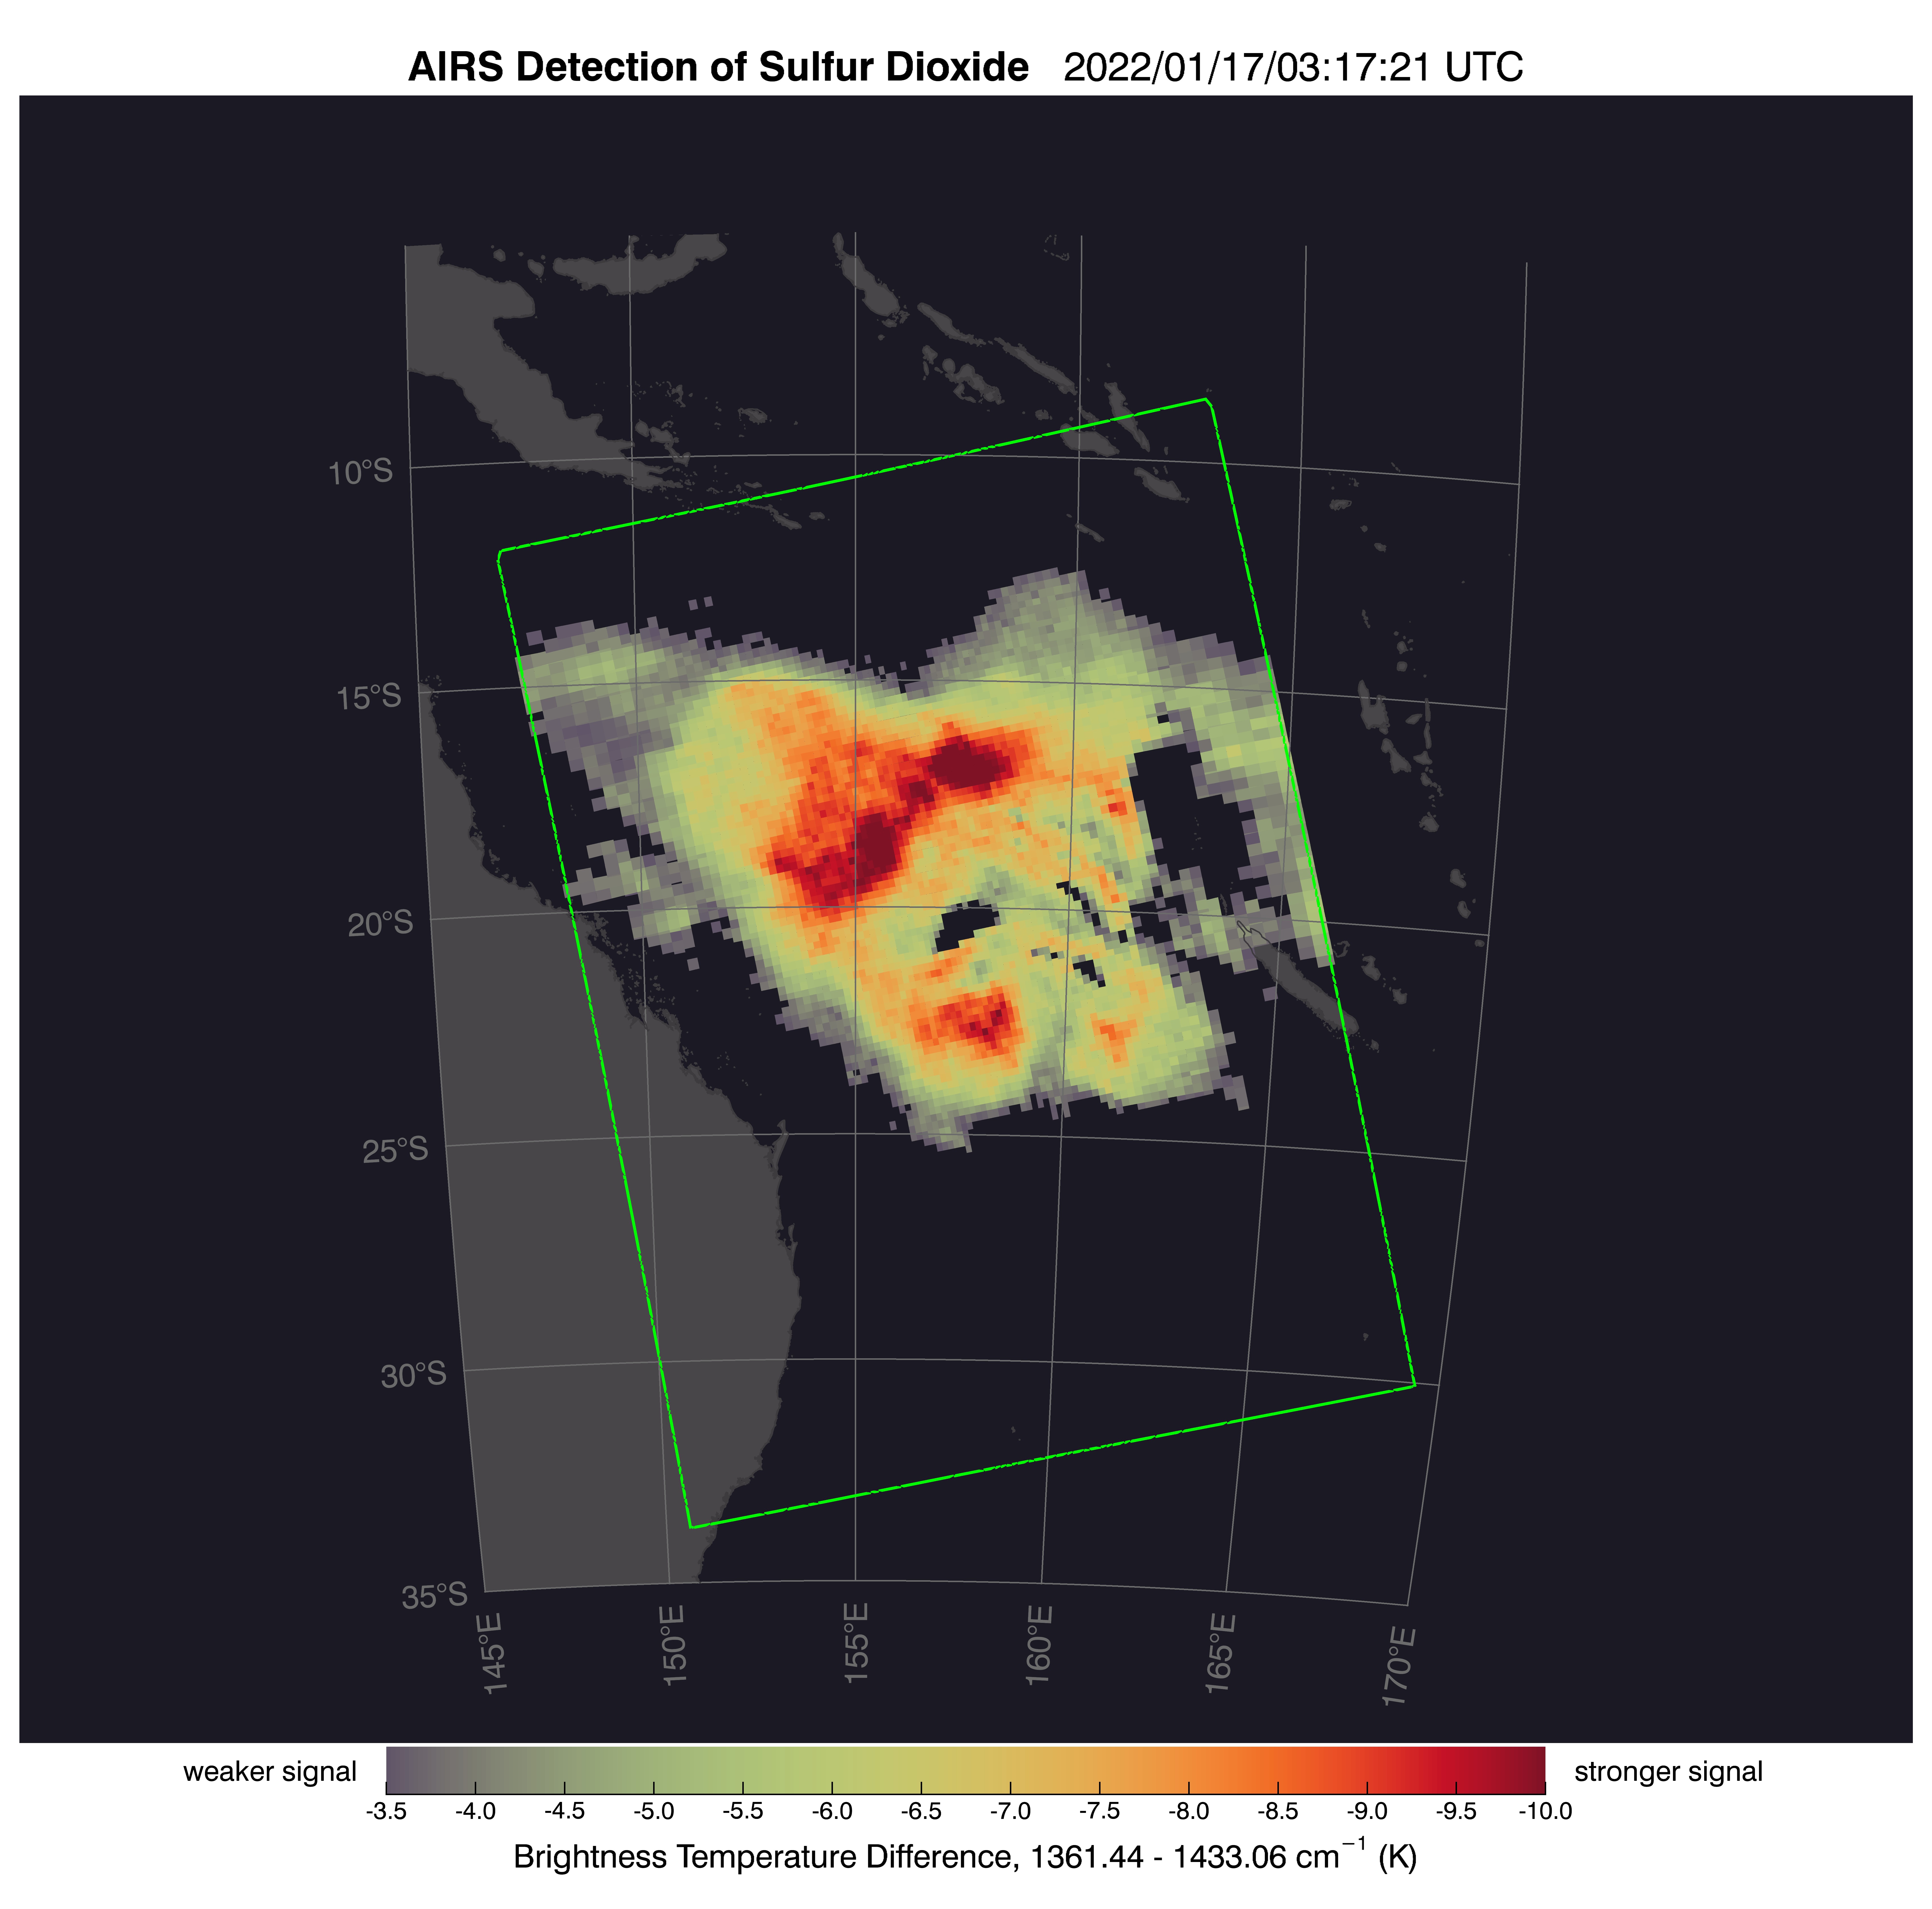 This image shows a detection of sulfur dioxide in AIRS data taken about two days after the Tonga volcano eruptions in January 2022. 